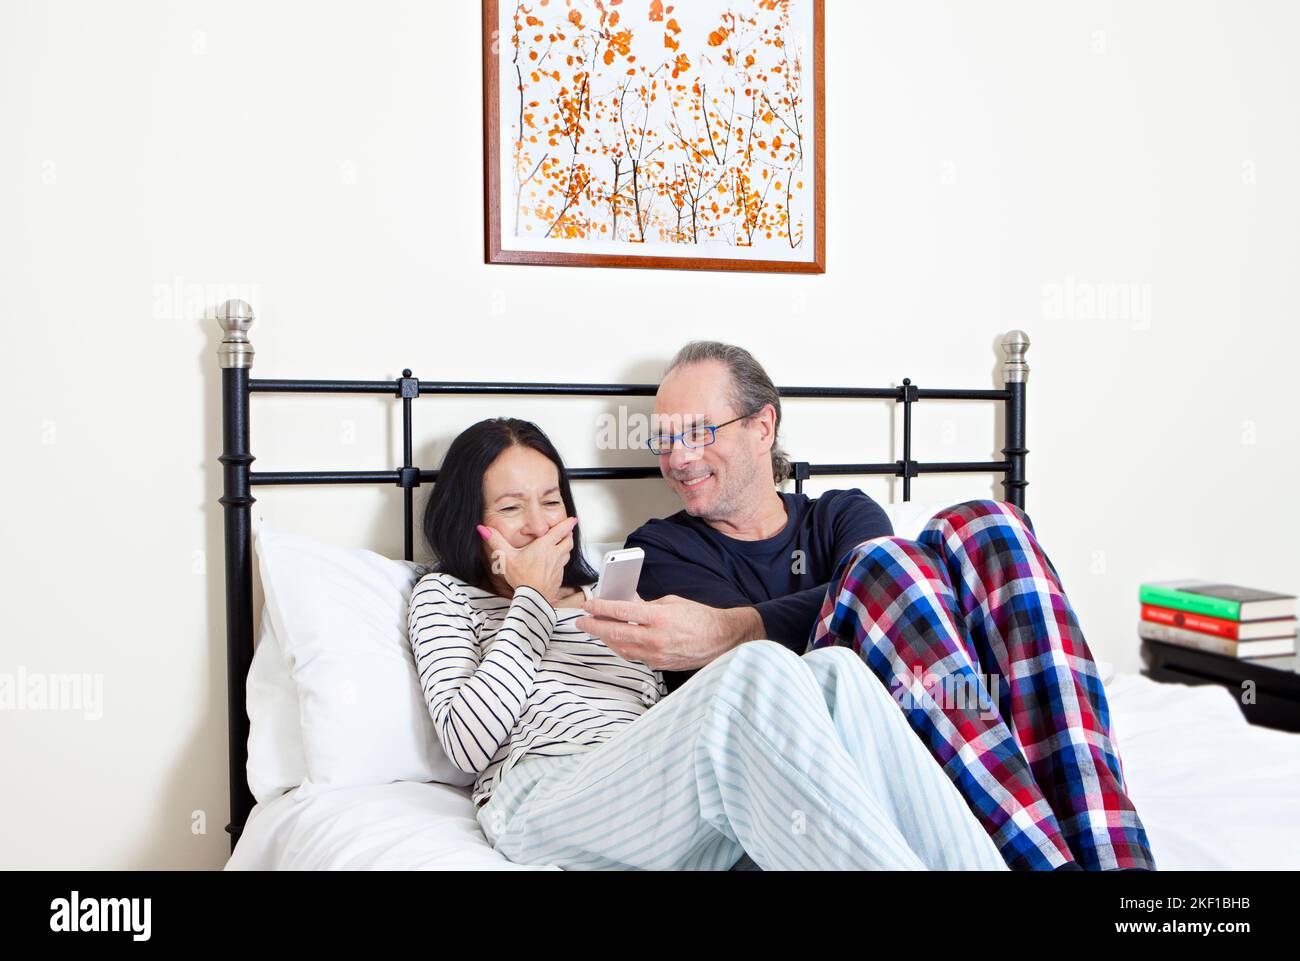 Mature couple in bed, laughing together Stock Photo